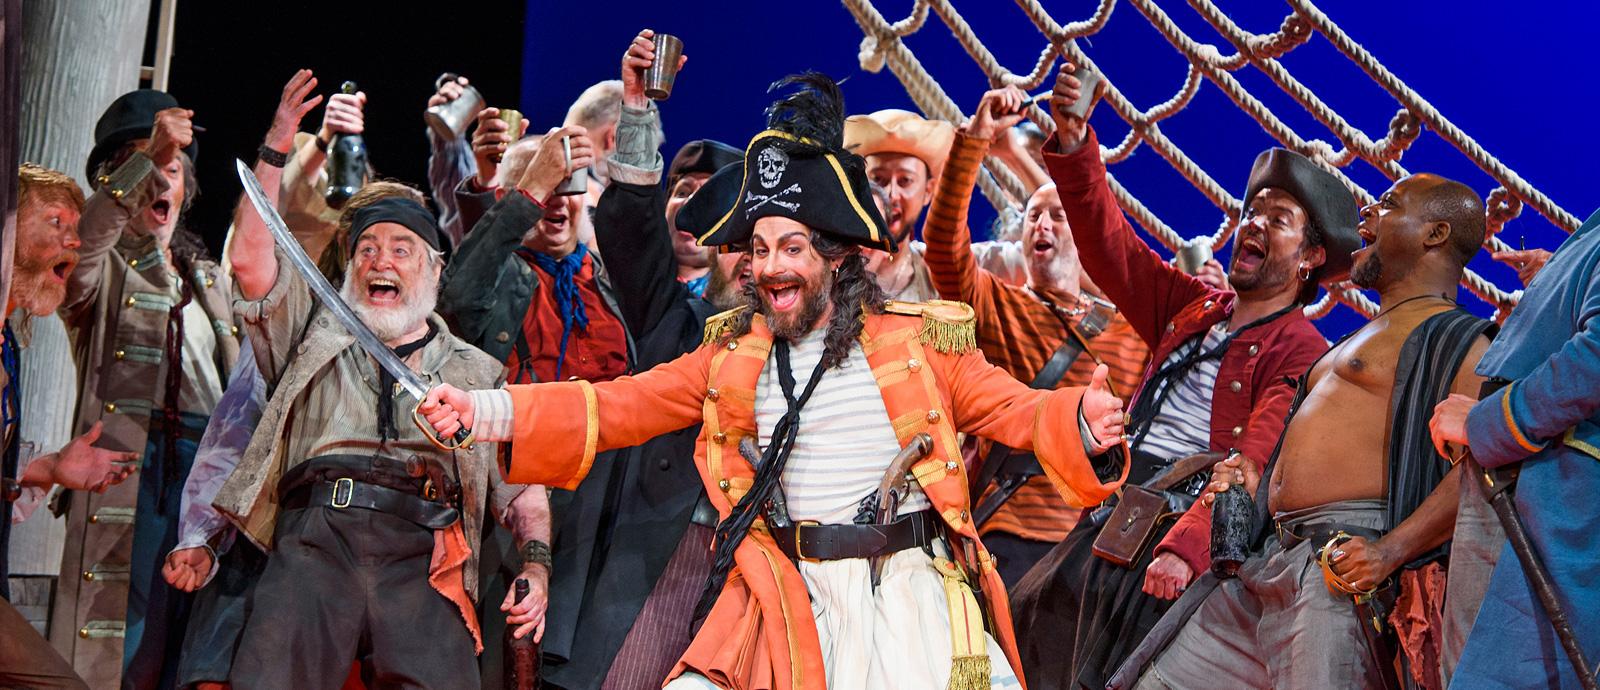 ENO's The Pirates of Penzance - Joshua Bloom as the Pirate King and Company. Photo by Tristram Kenton